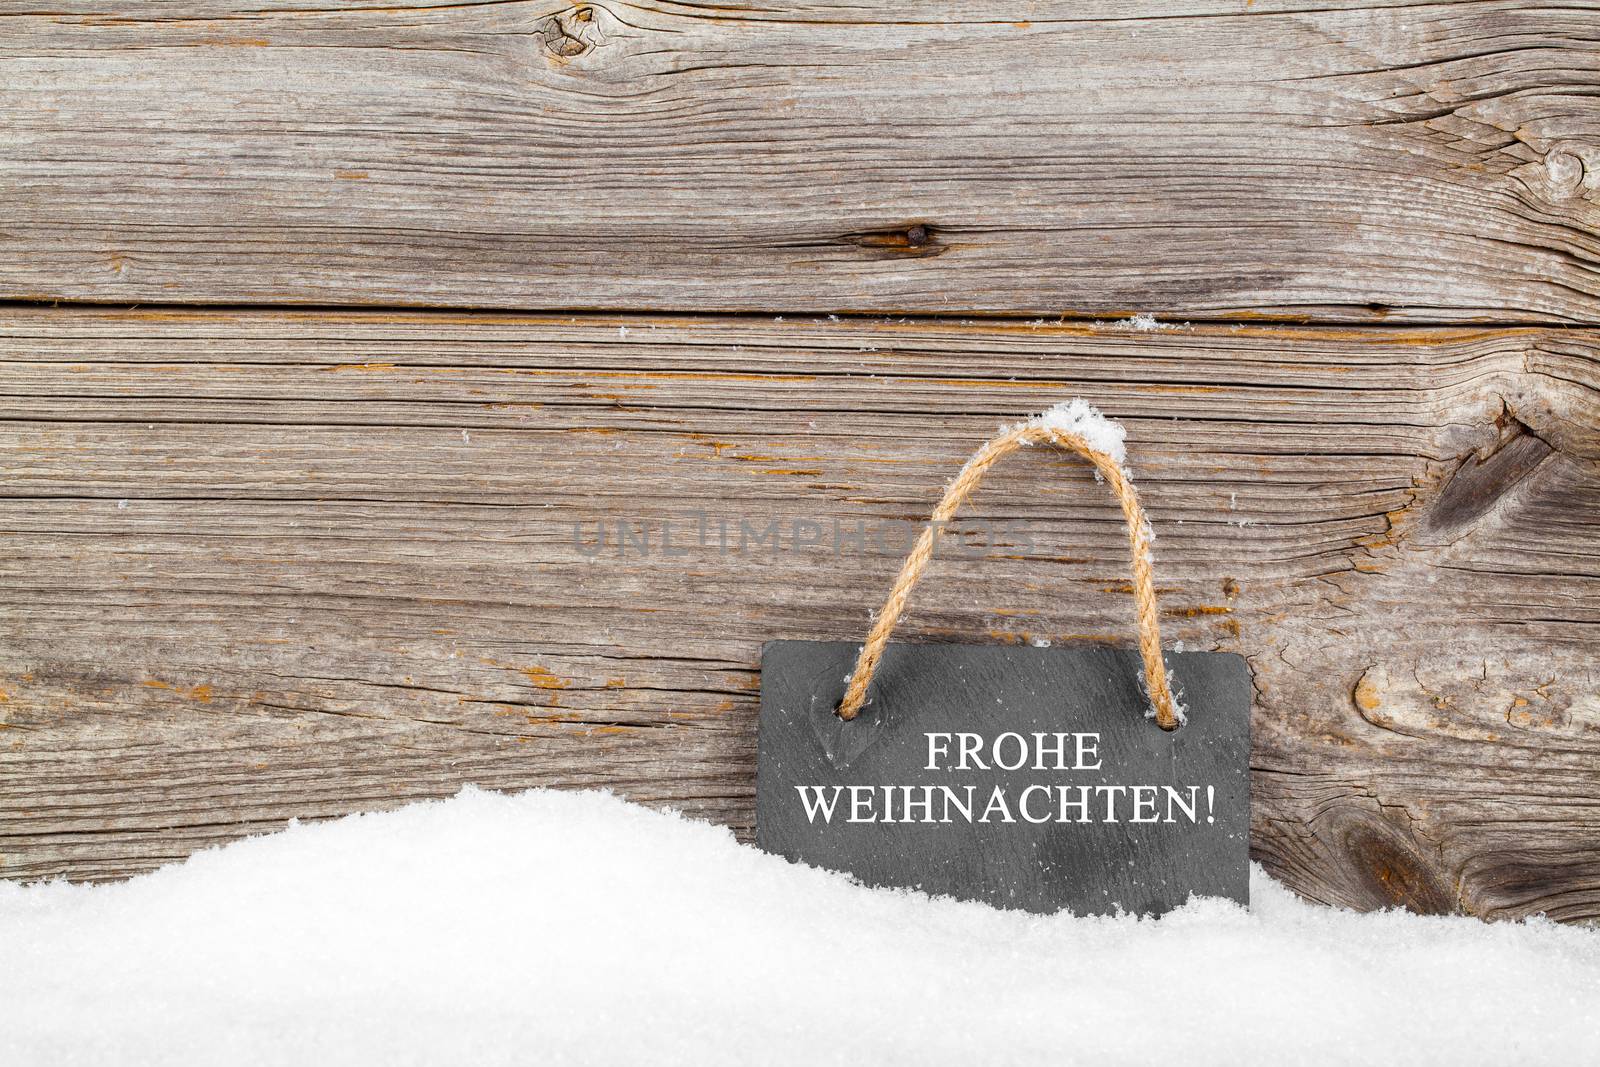 Black board of slate on old rustic wooden background, with snow